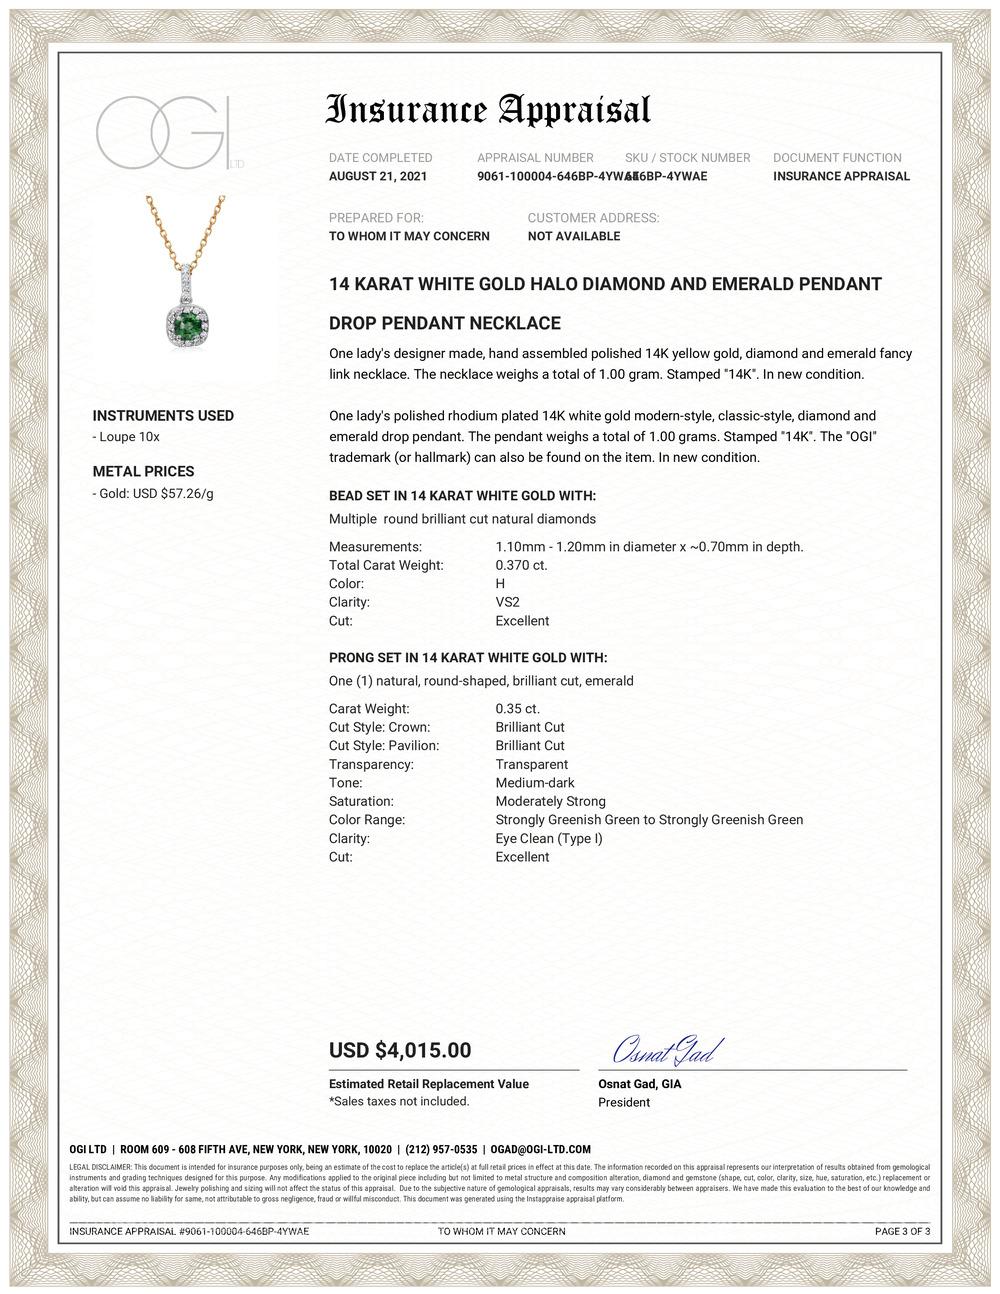 14 karats white gold pendant with halo diamond emerald pendant and 14 karat yellow gold necklace
Necklace measuring 17 inches long
Round Emerald-cut emerald weighing 0.35 carats, measuring 4.5 millimeter 
Diamonds framing the emerald weighing 0.28